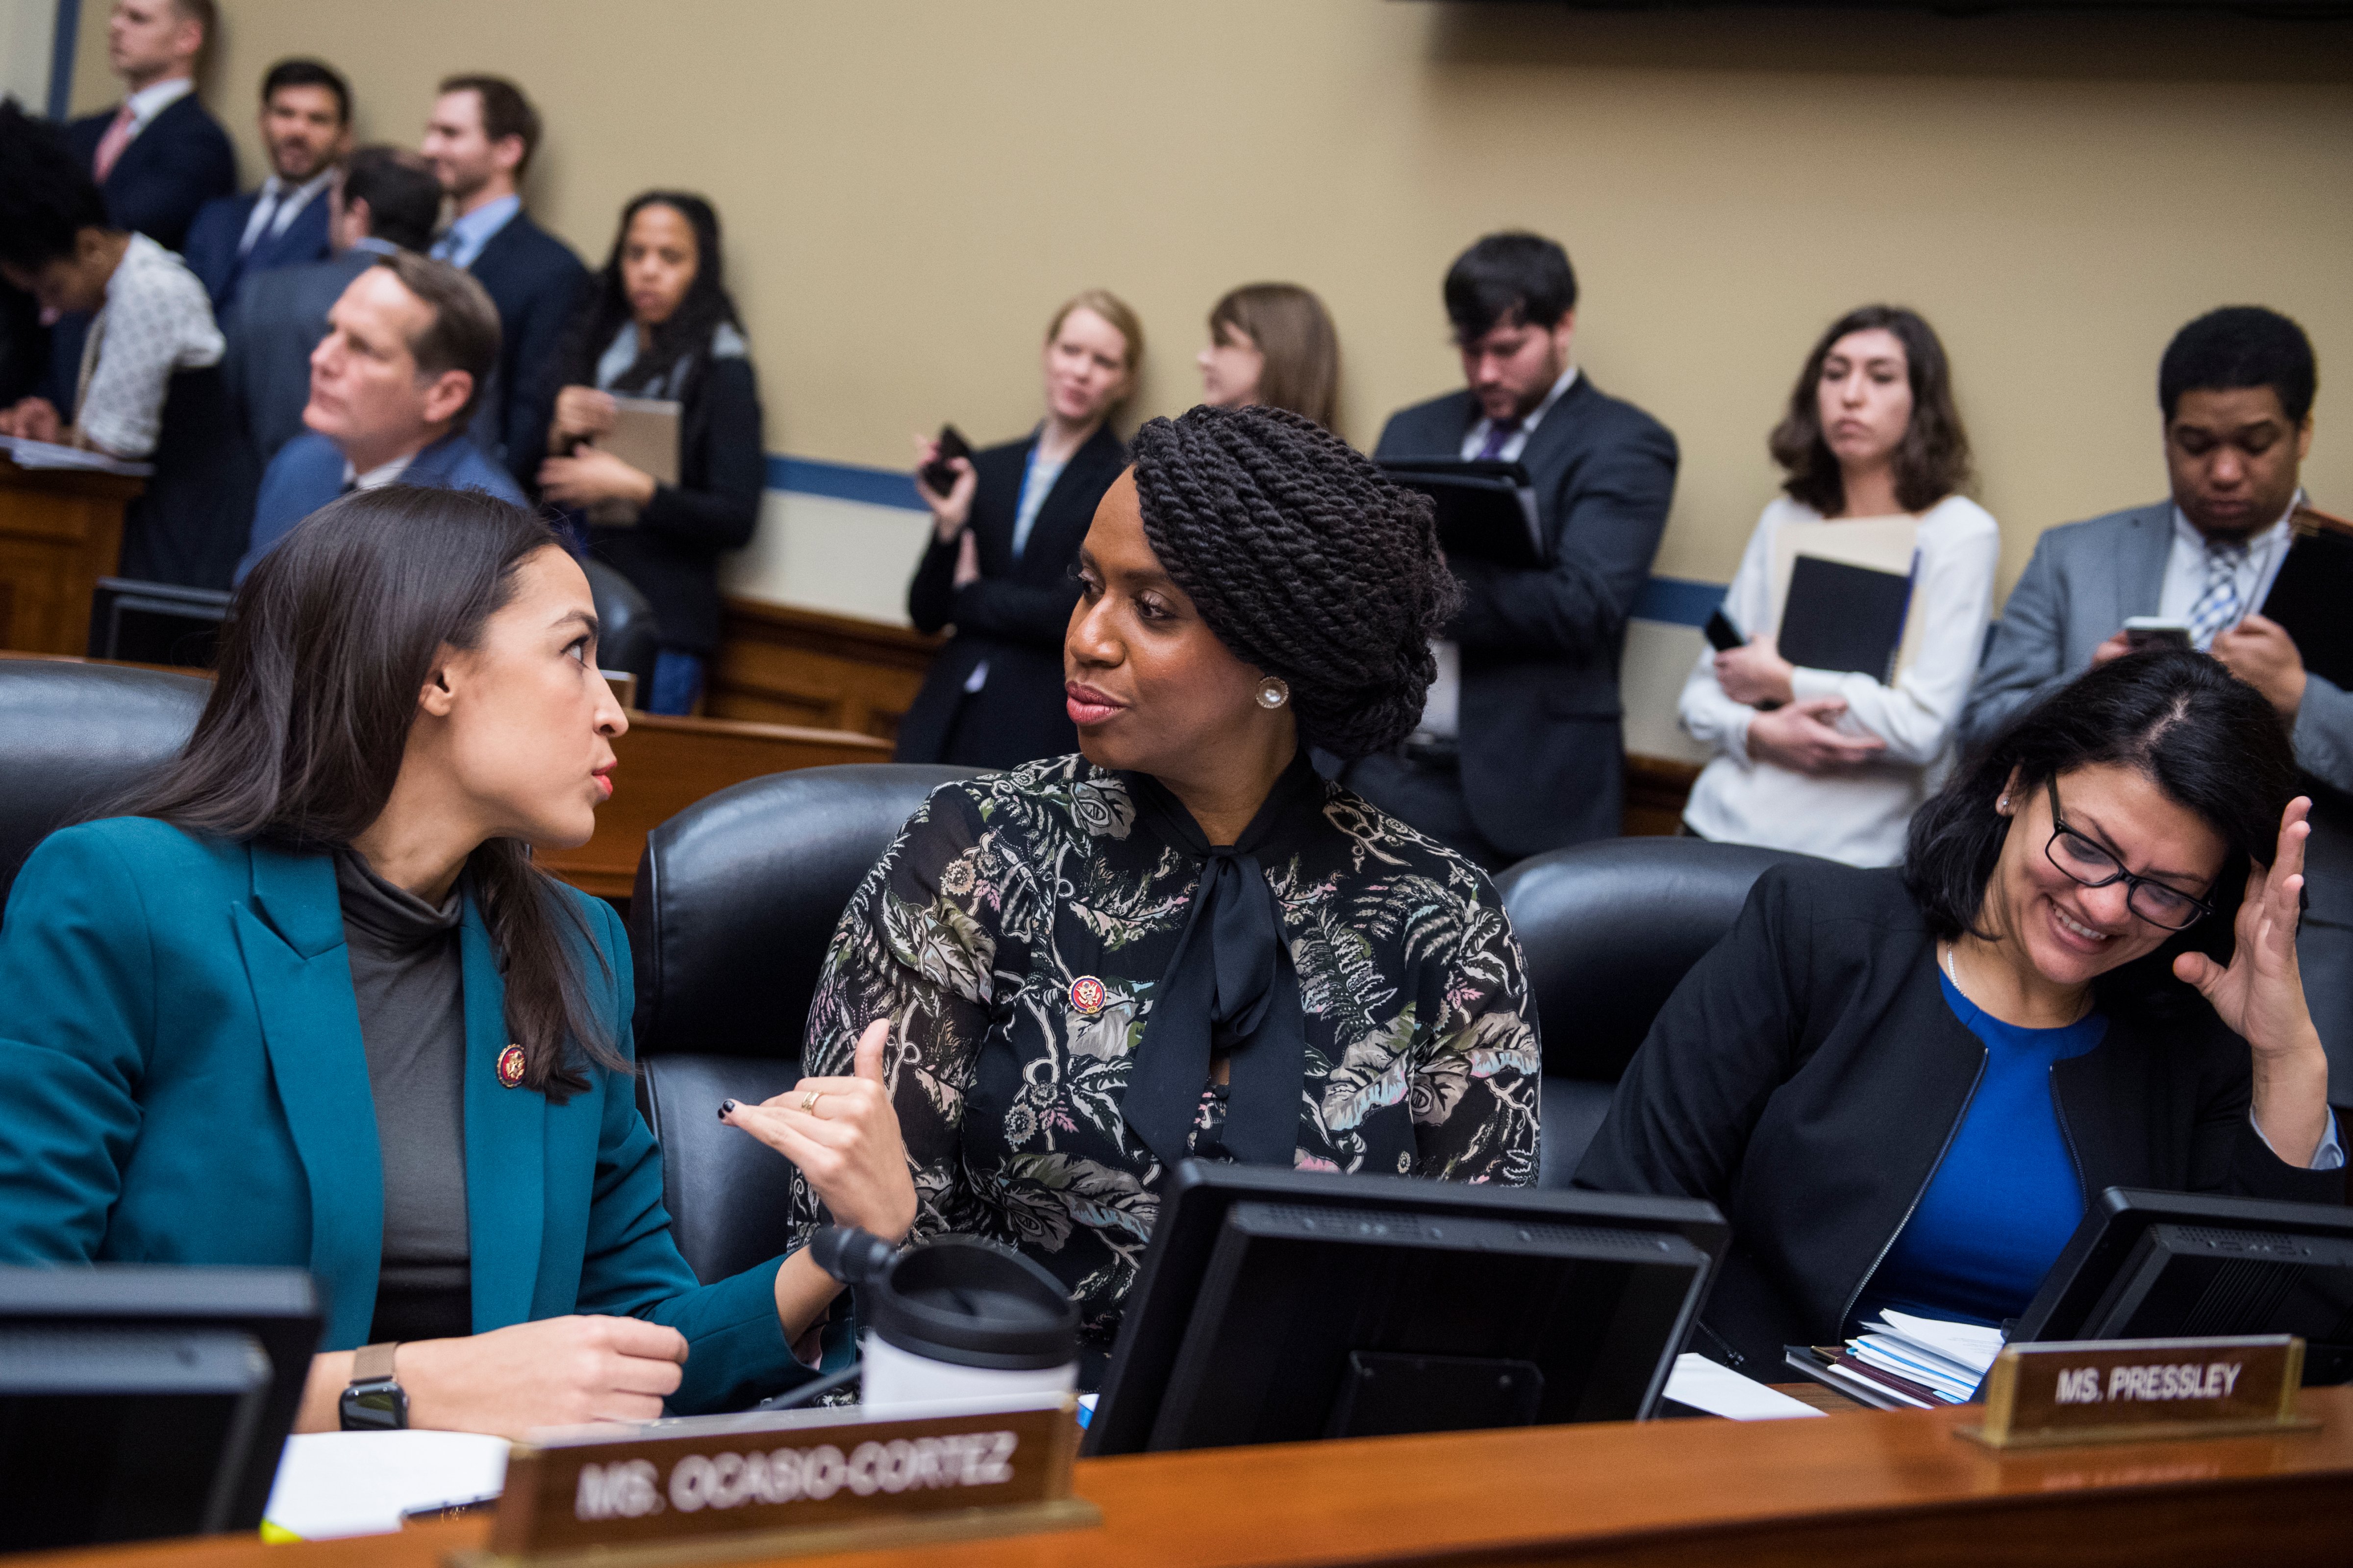 Reps. Alexandria Ocasio-Cortez, D-N.Y., Ayanna Pressley, D-Mass., and Rashida Tlaib, D-Mich., attend a meeting in Rayburn Building on Jan. 29, 2019. (Tom Williams—CQ-Roll Call/Getty Images)